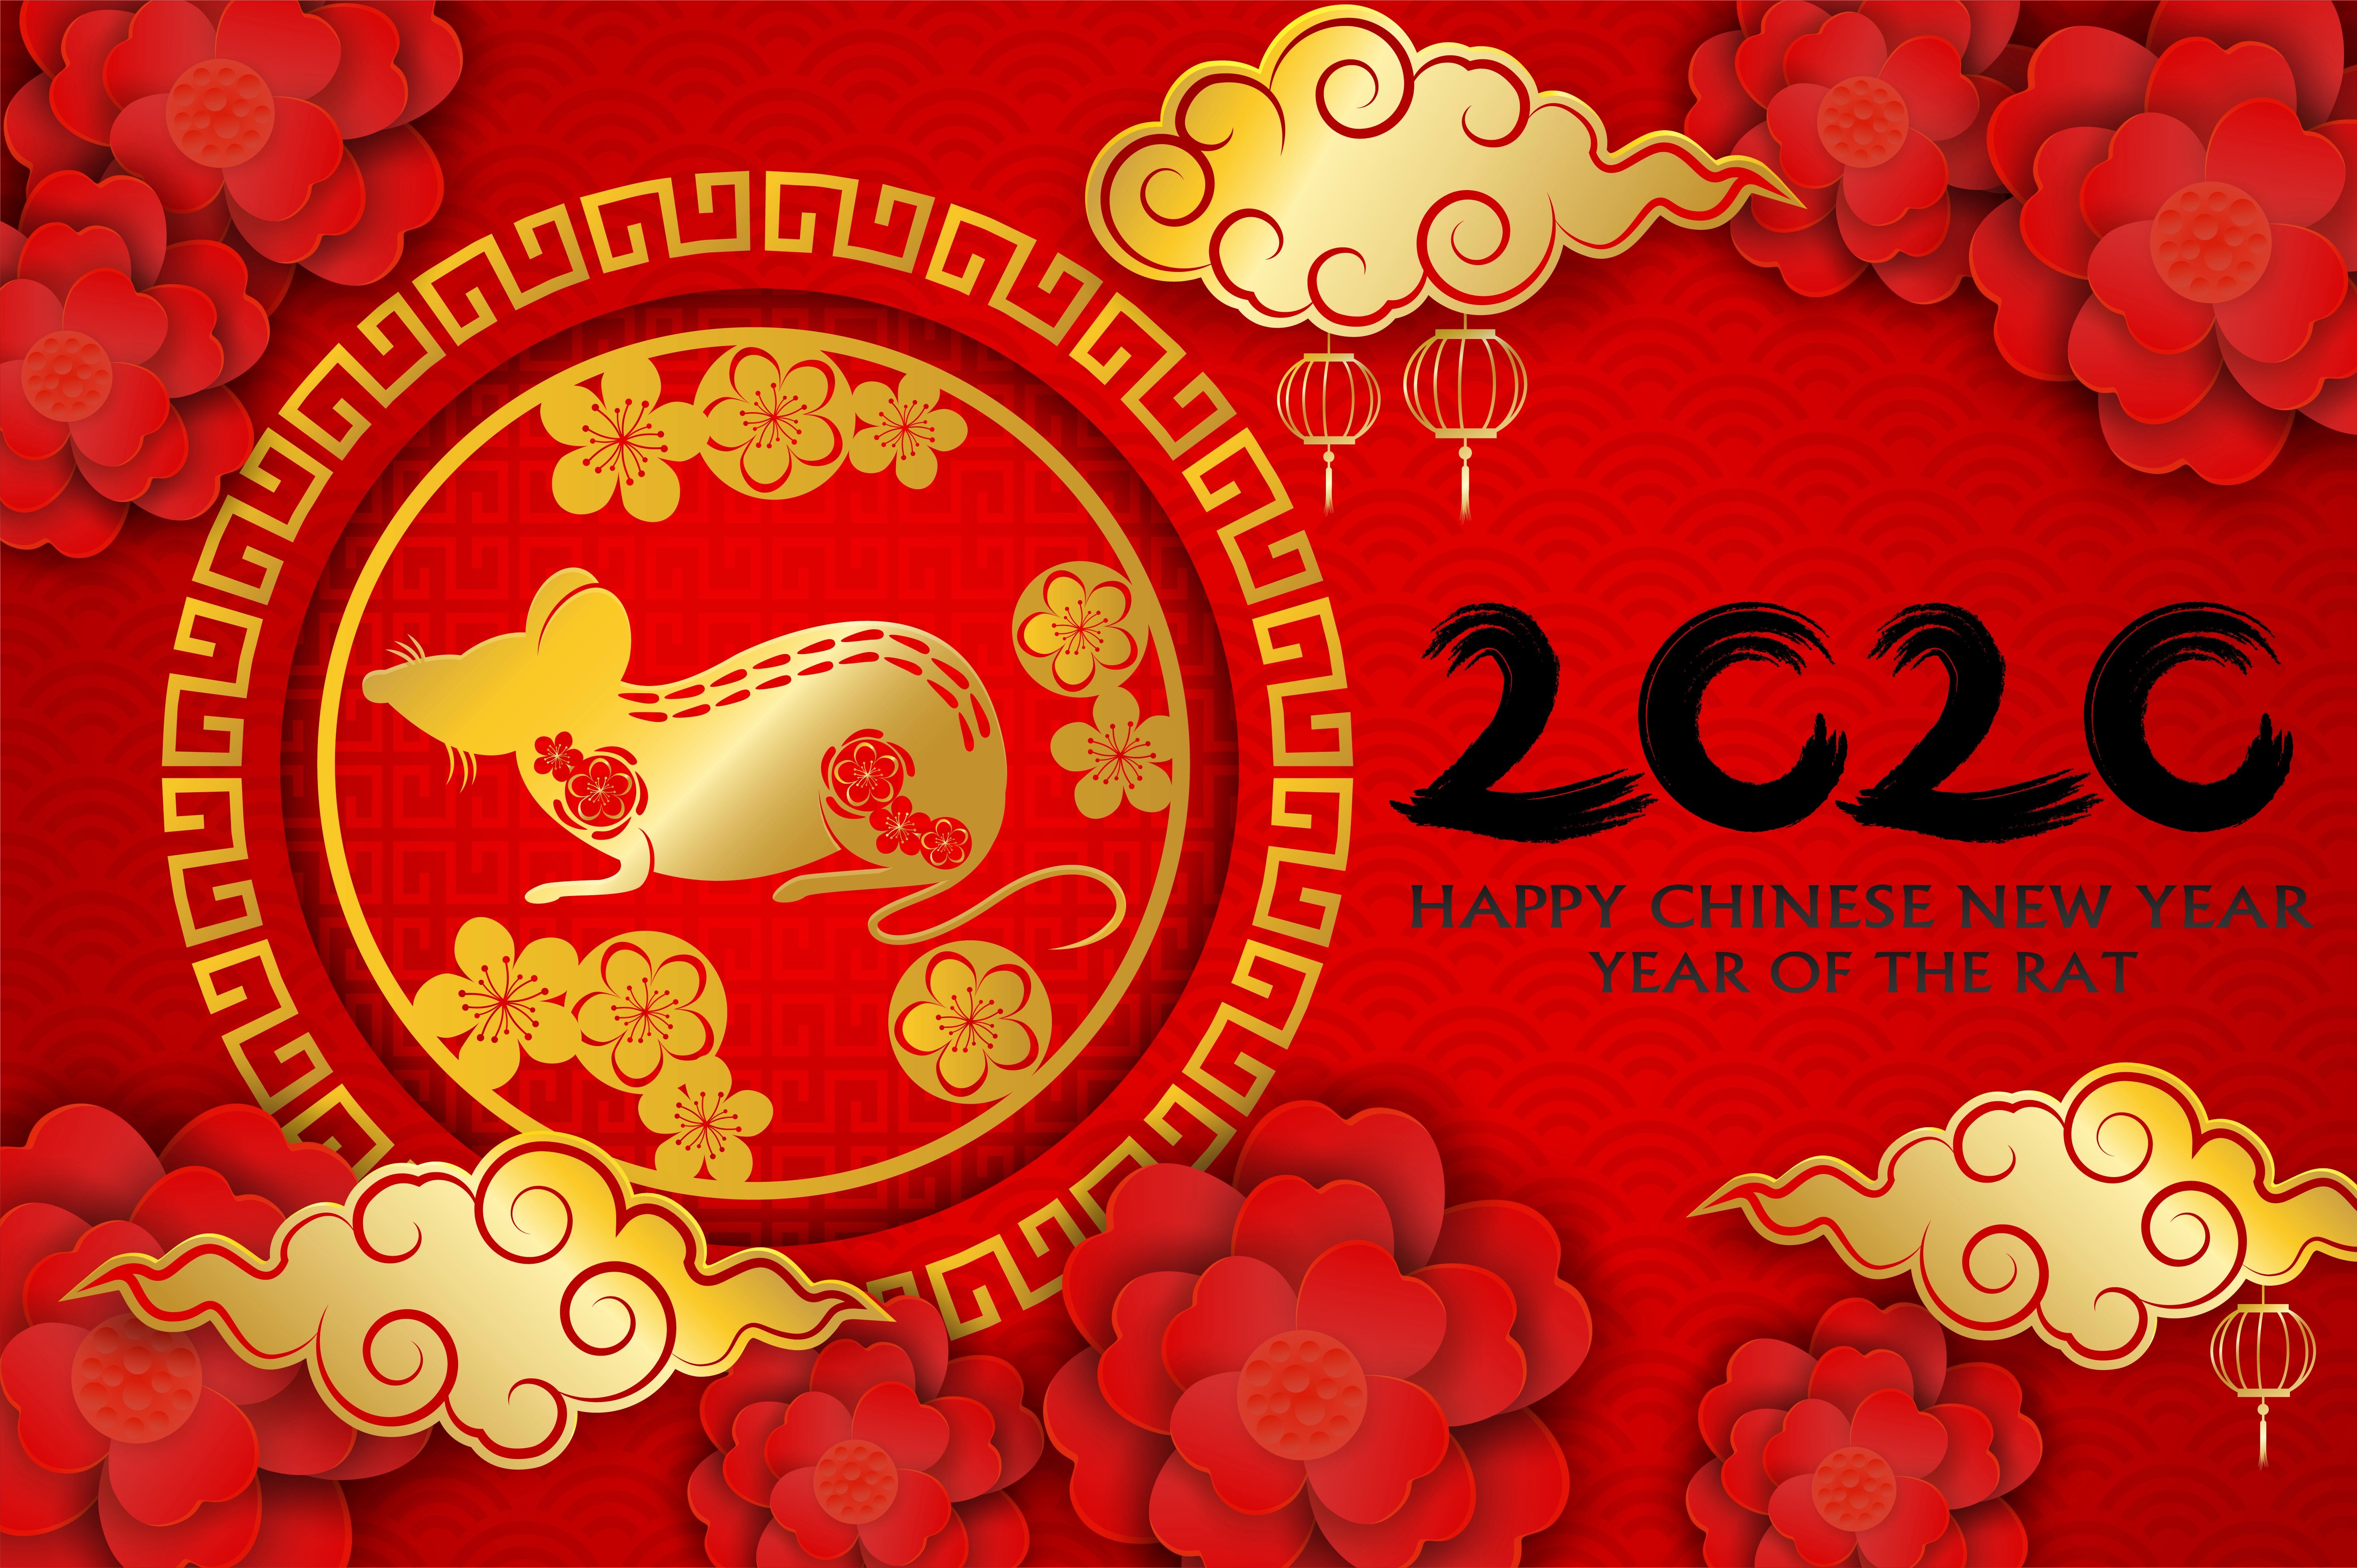 holiday, chinese new year, happy new year, rat Full HD